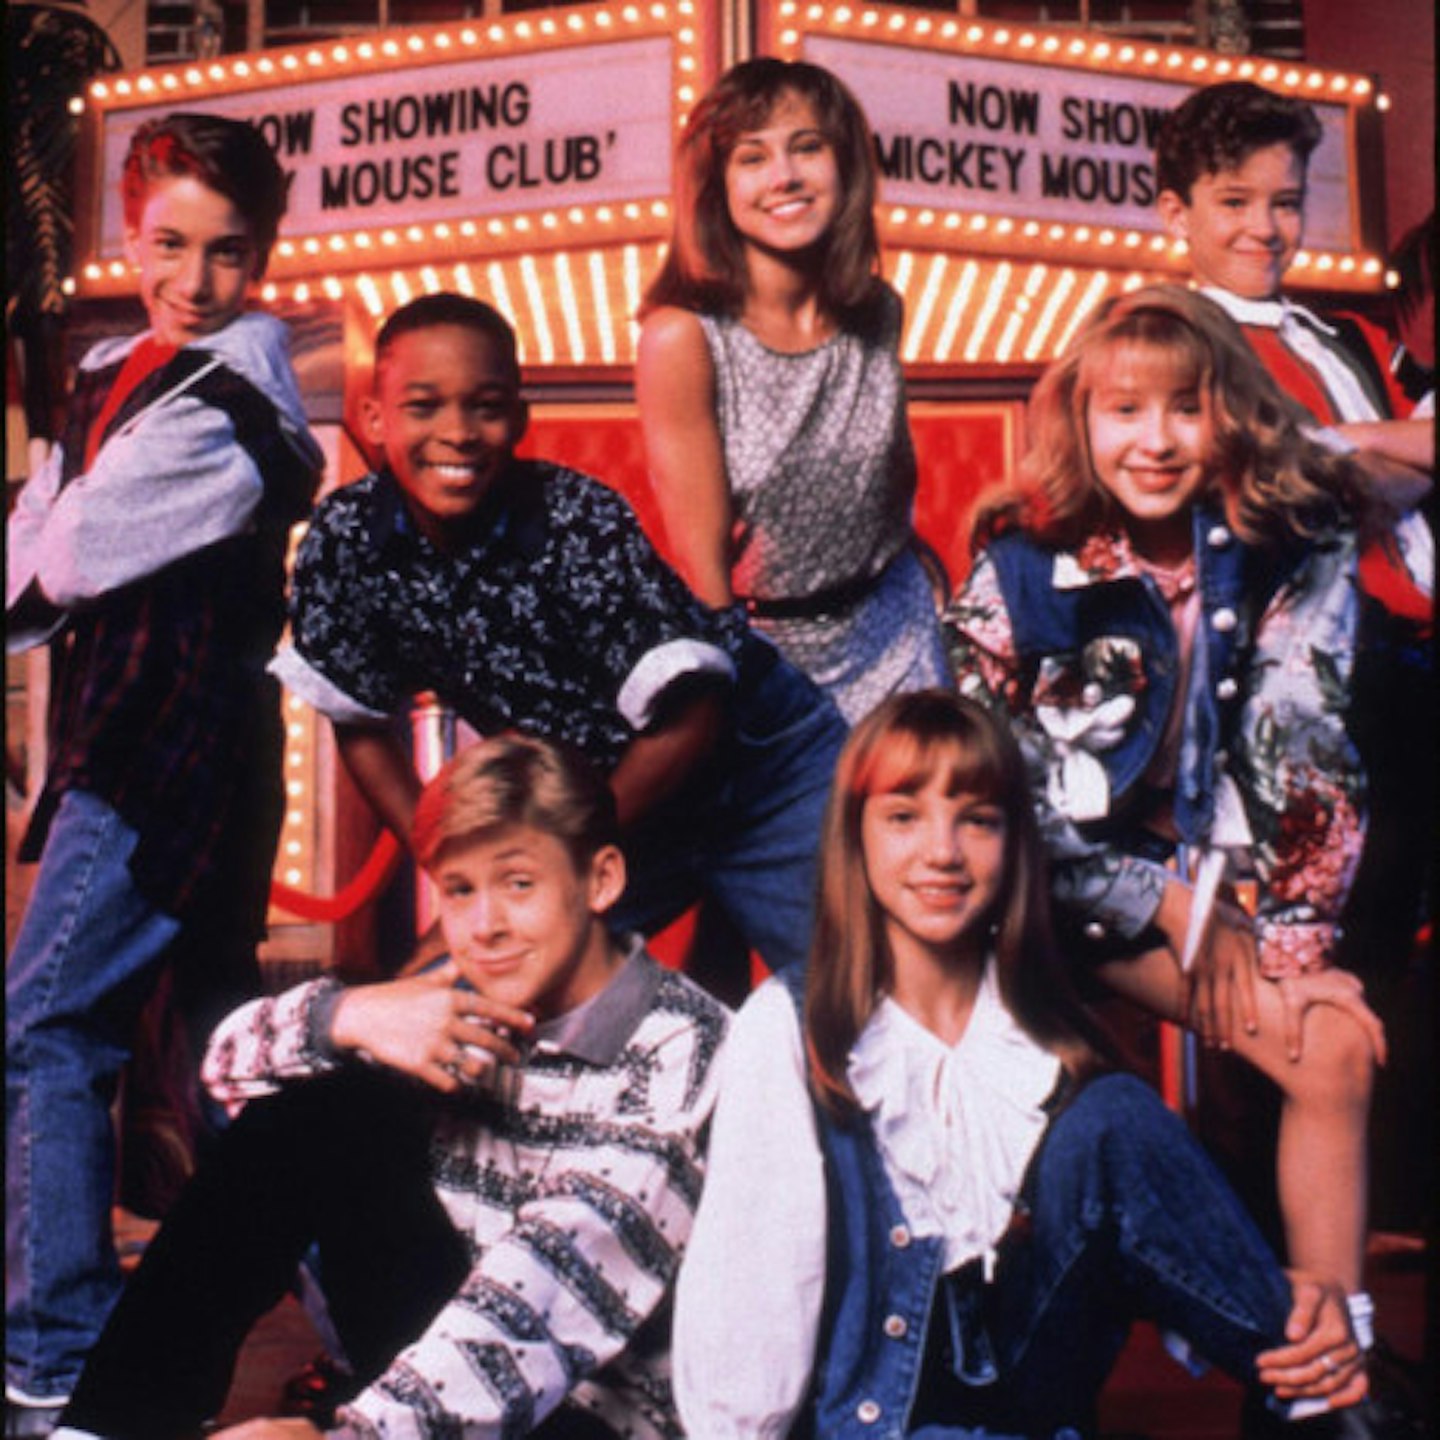 Britney and Christina with Justin and Ryan Gosling (!) in the Micky Mouse Club